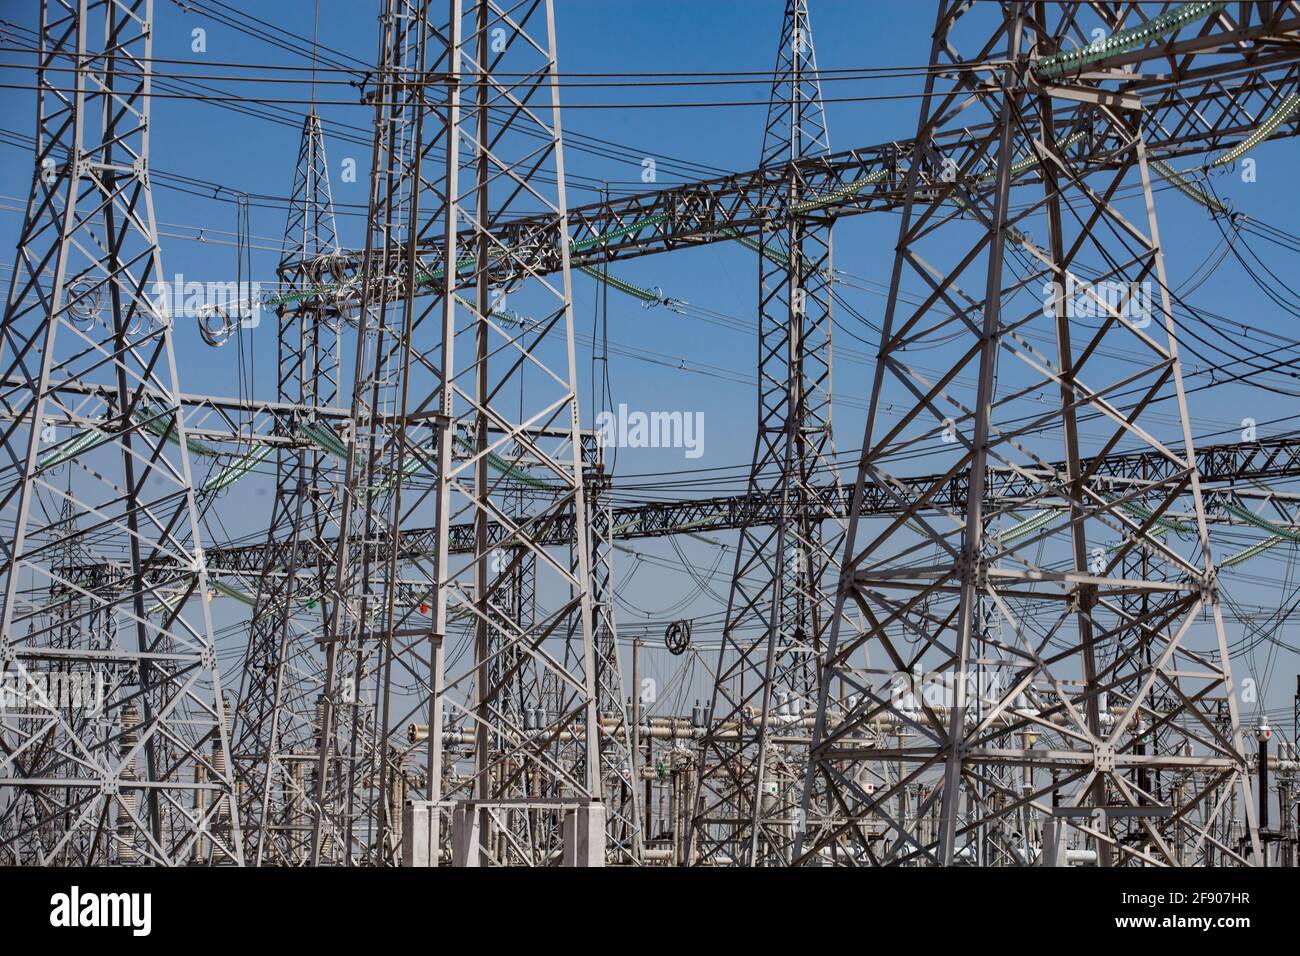 Electricity distribution substation. Pylons and cables. Blue sky background. Stock Photo